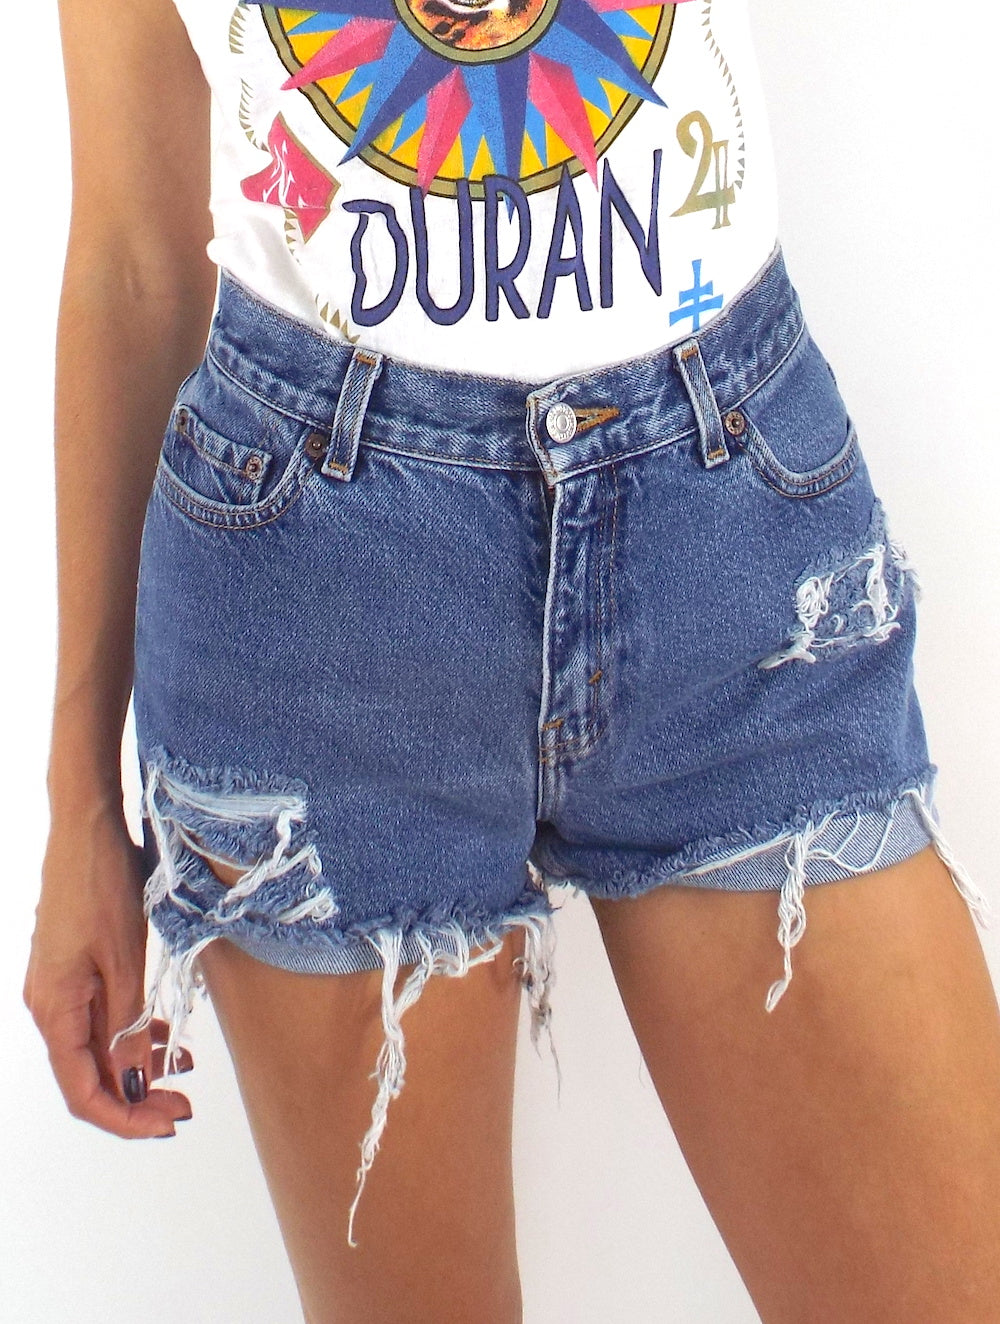 Vintage 90s Distressed High-Waist Levi's Cut-Off Shorts -- Size 28